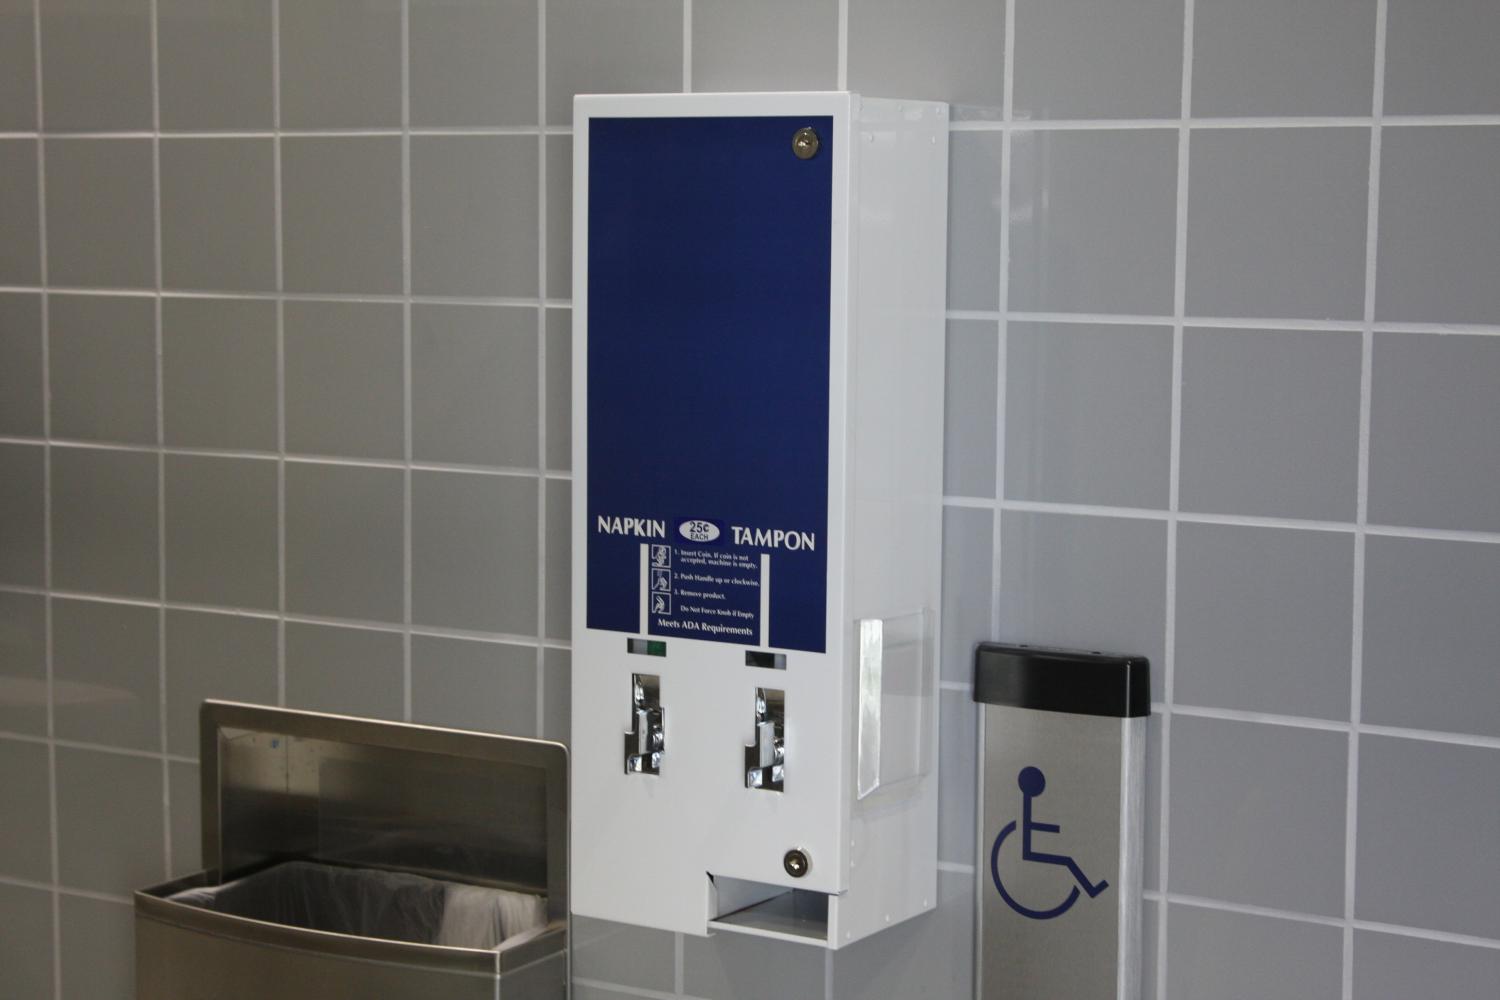 Newly+installed+tampon+and+napkin+dispenser+in+the+womens+restroom+of+the+Fine+Arts+Building+on+the+second+floor.+All+womens+restroom+should+have+dispensers+according+to+Vice+President+of+Student+Services+Dr.+Stephen+B.+Johnson.+Photo+credit%3A+David+Jenkins